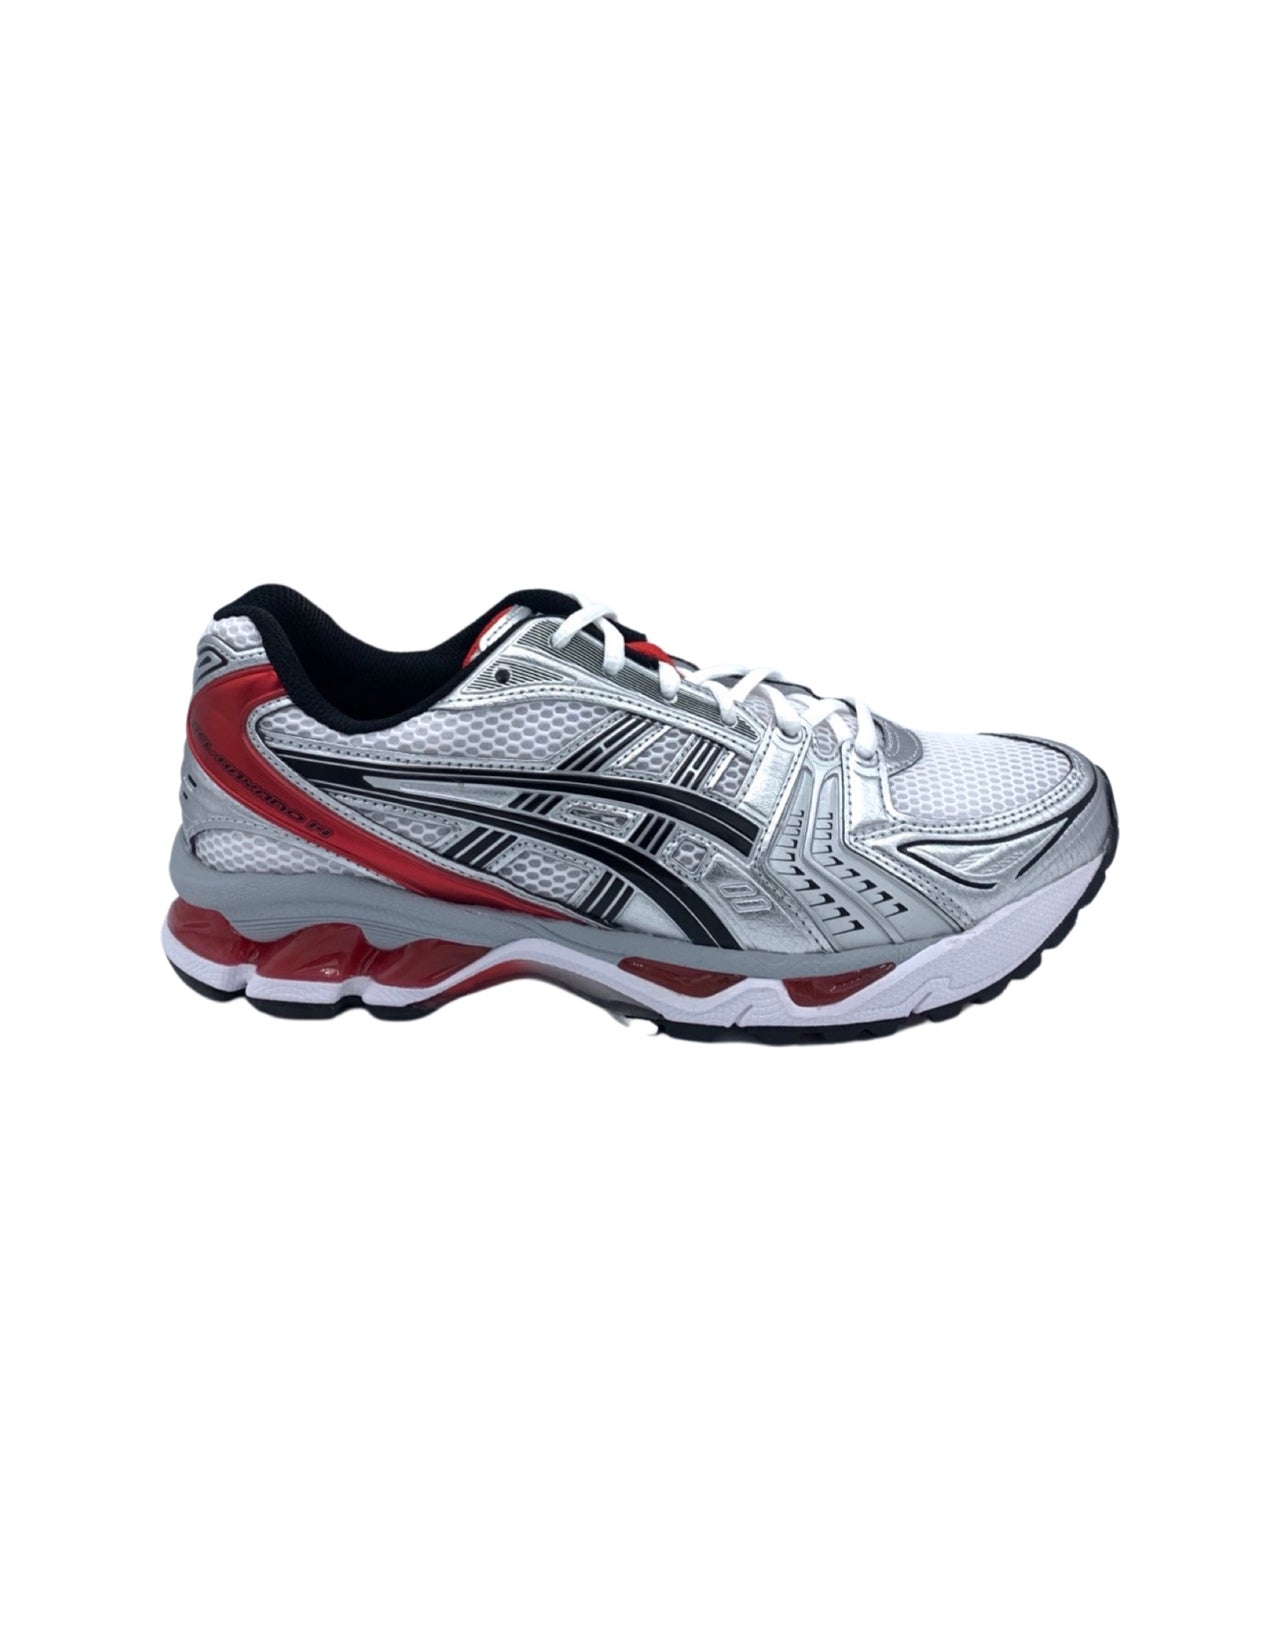 ASICS Gel-Kayano 14 1201A019-103 WHITE/CLASSIC RED